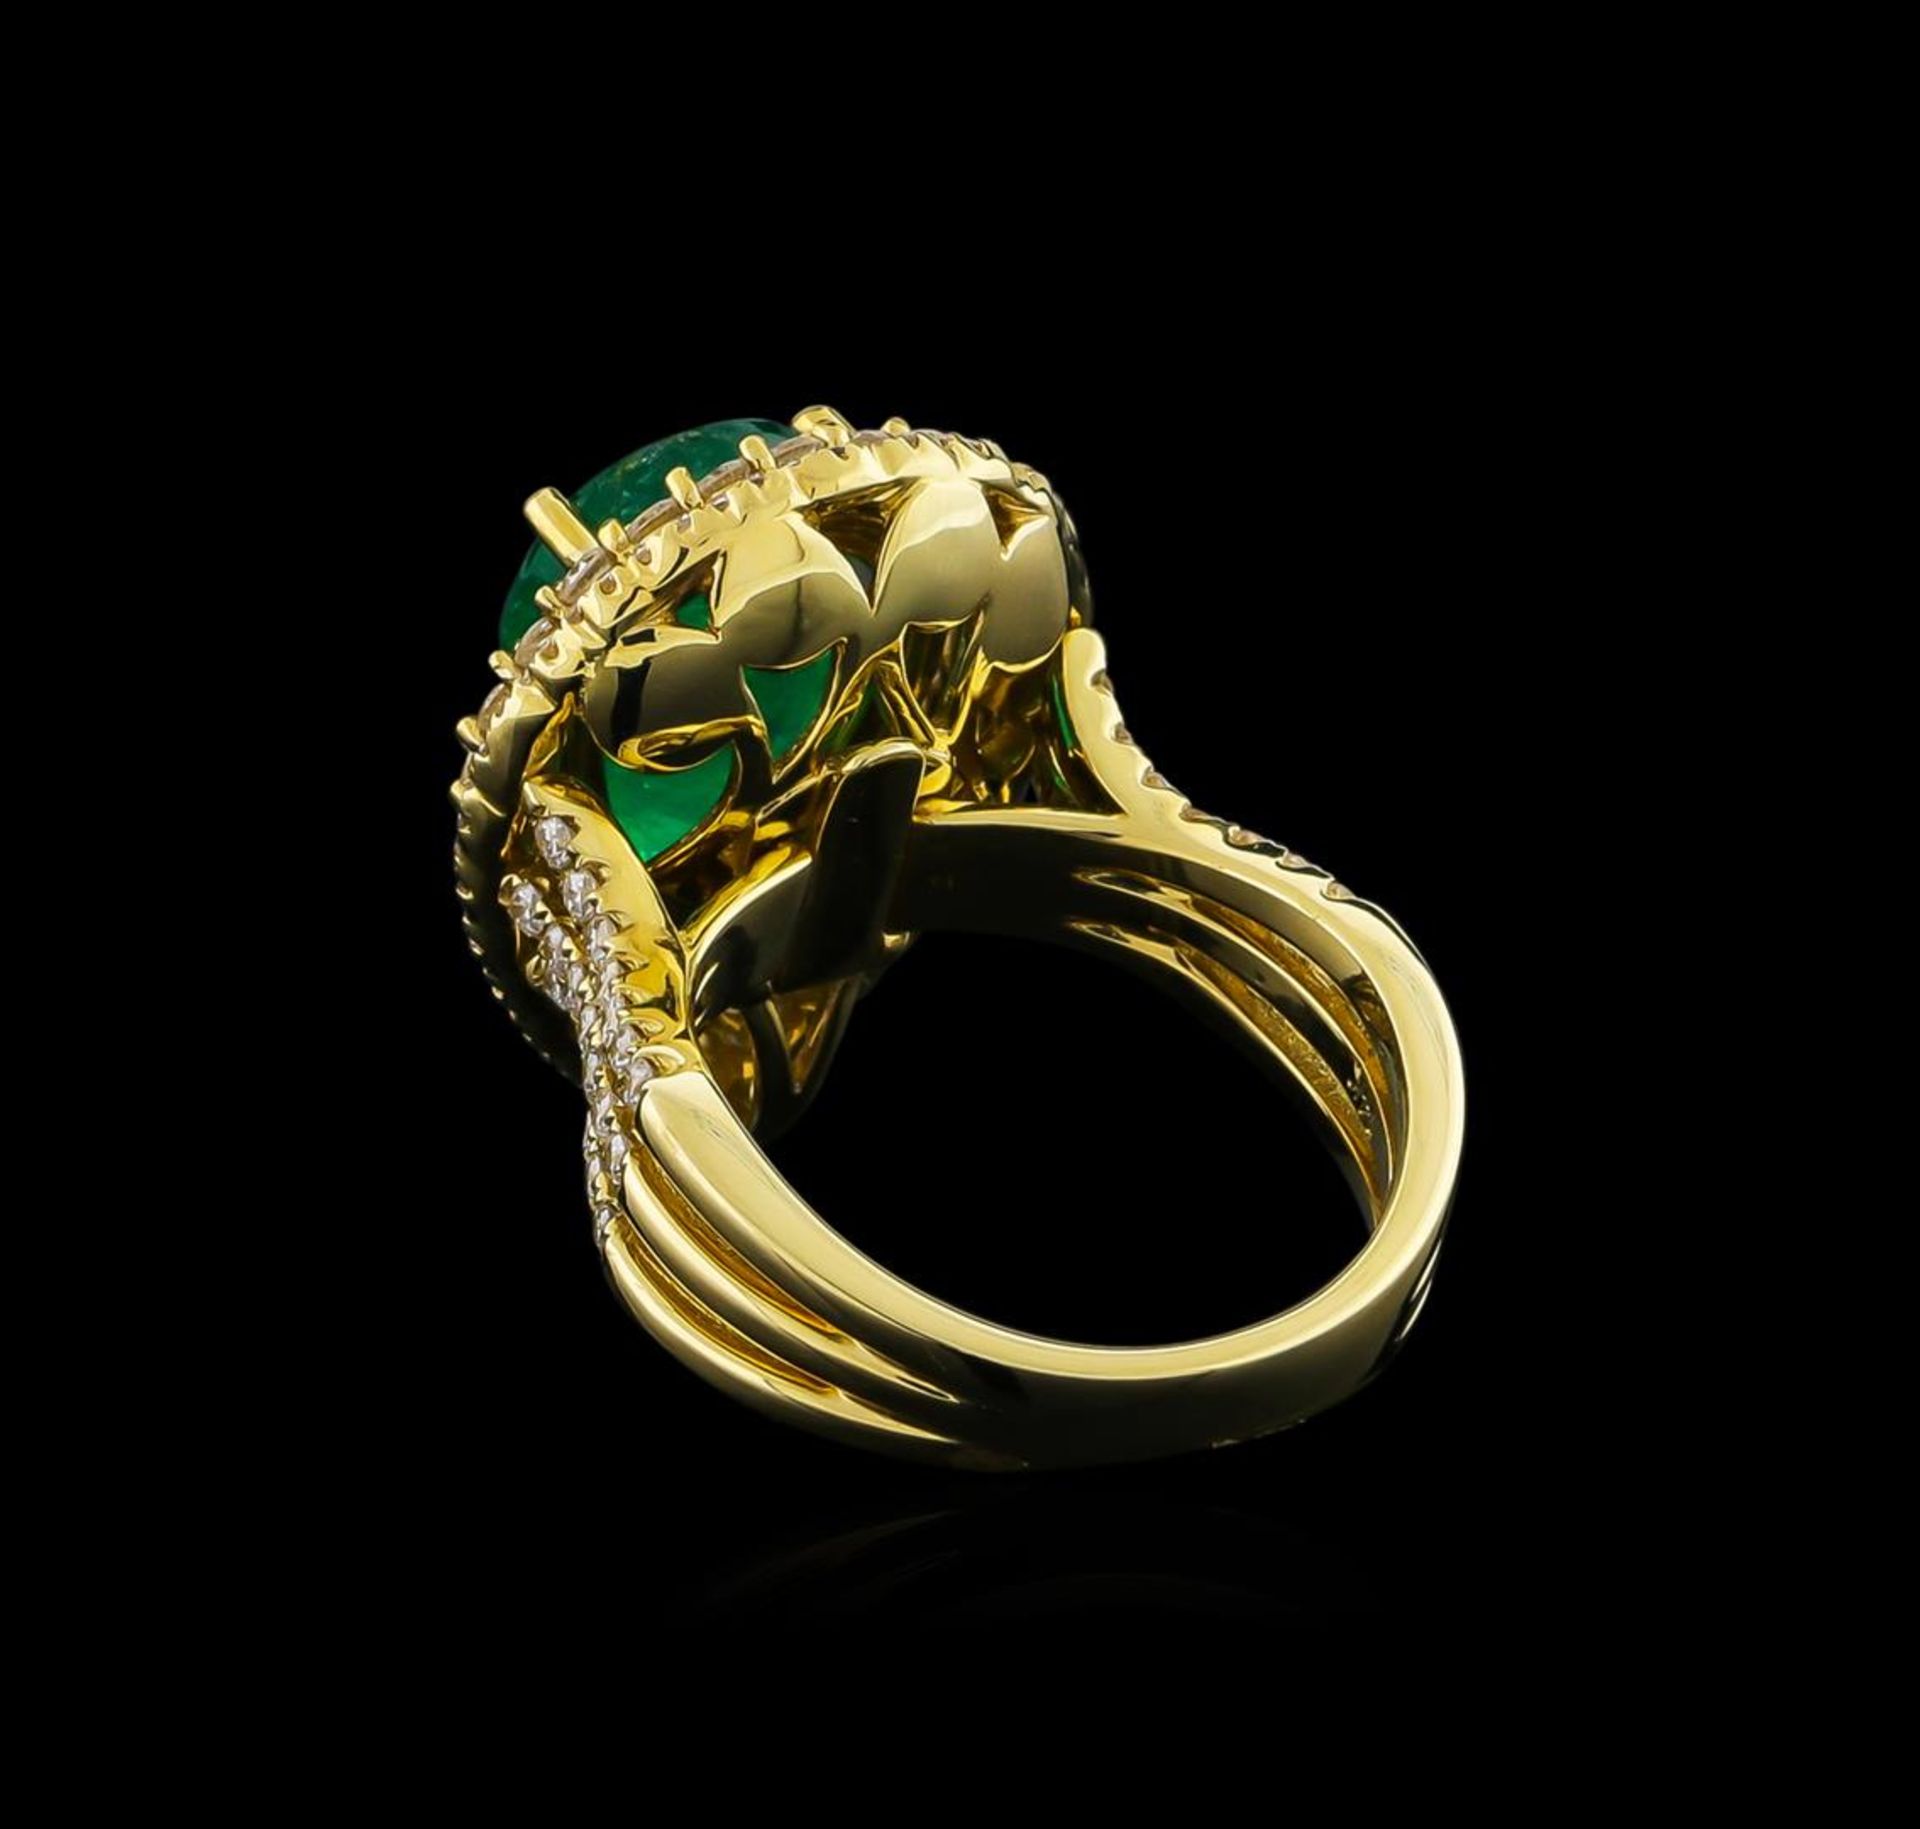 14KT Yellow Gold 4.10 ctw Emerald and Diamond Ring - Image 3 of 5